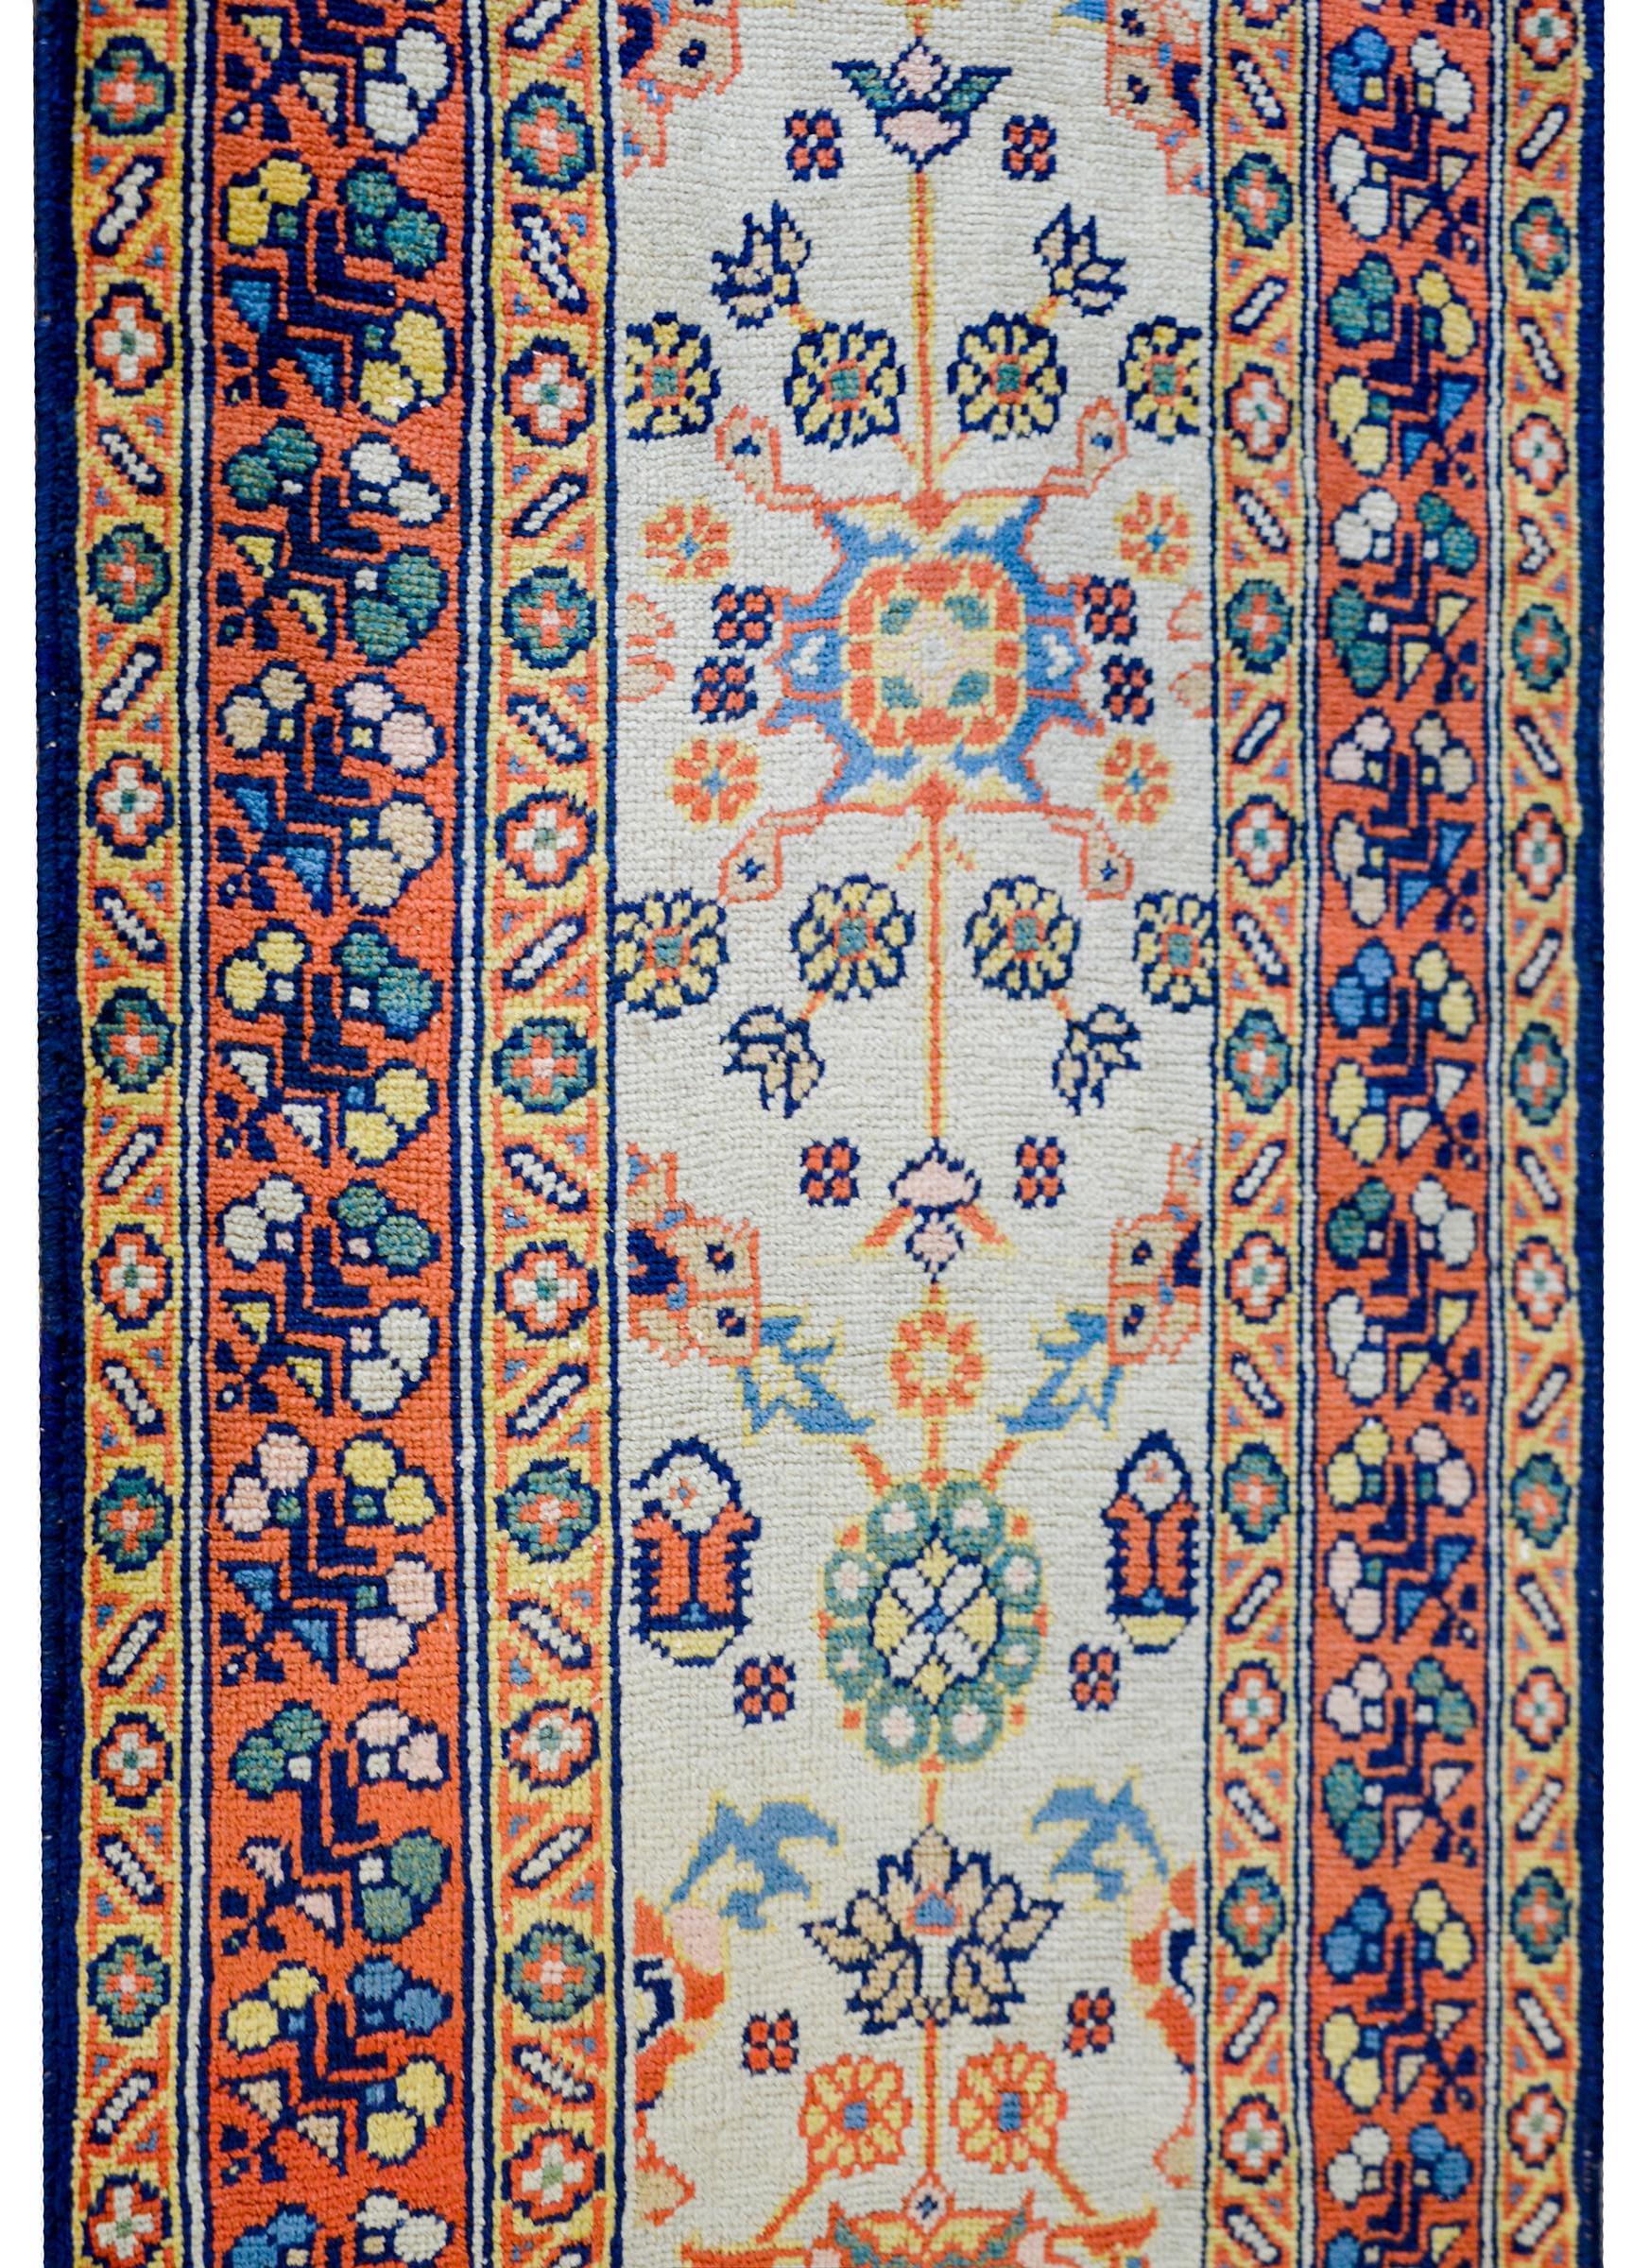 An early 20th century Persian Sultanabad runner with a fantastic all-over multicolored floral pattern woven in crimson, green, indigo, and gold, on a white background. The border is beautiful with a wide central floral patterned stripe with a